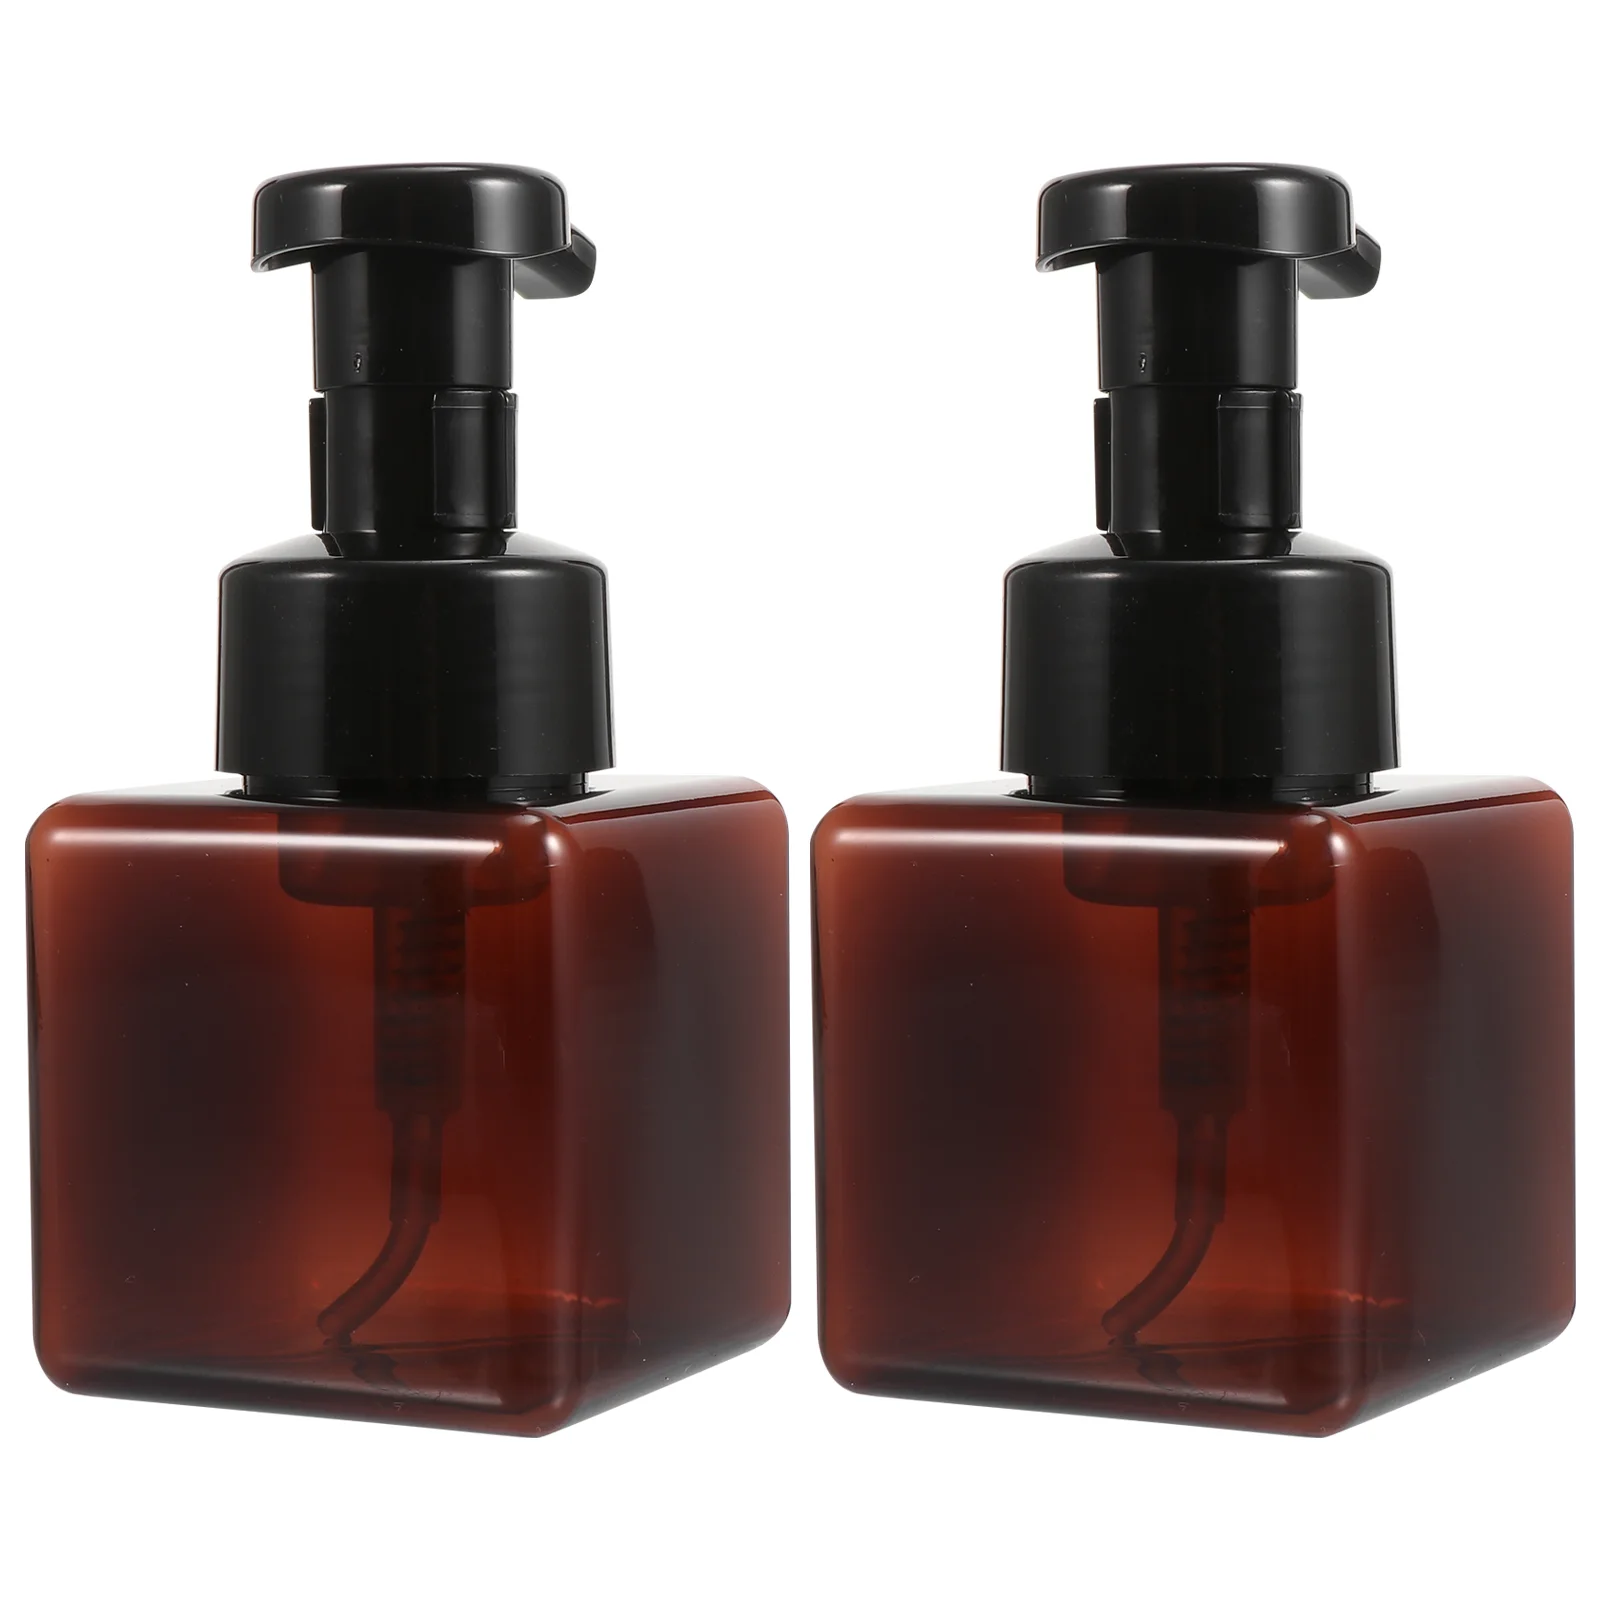 Hand Soap Dispenser Foaming Hand Bottle: 2pcs 250ml Lotion Cleanser Dispenser Pump Container for Bathroom Vanities Kitchen Brown 2pcs kitchen sink mat with quick draining design great sink protector foldable non slip silicone dish countertop insulation pad